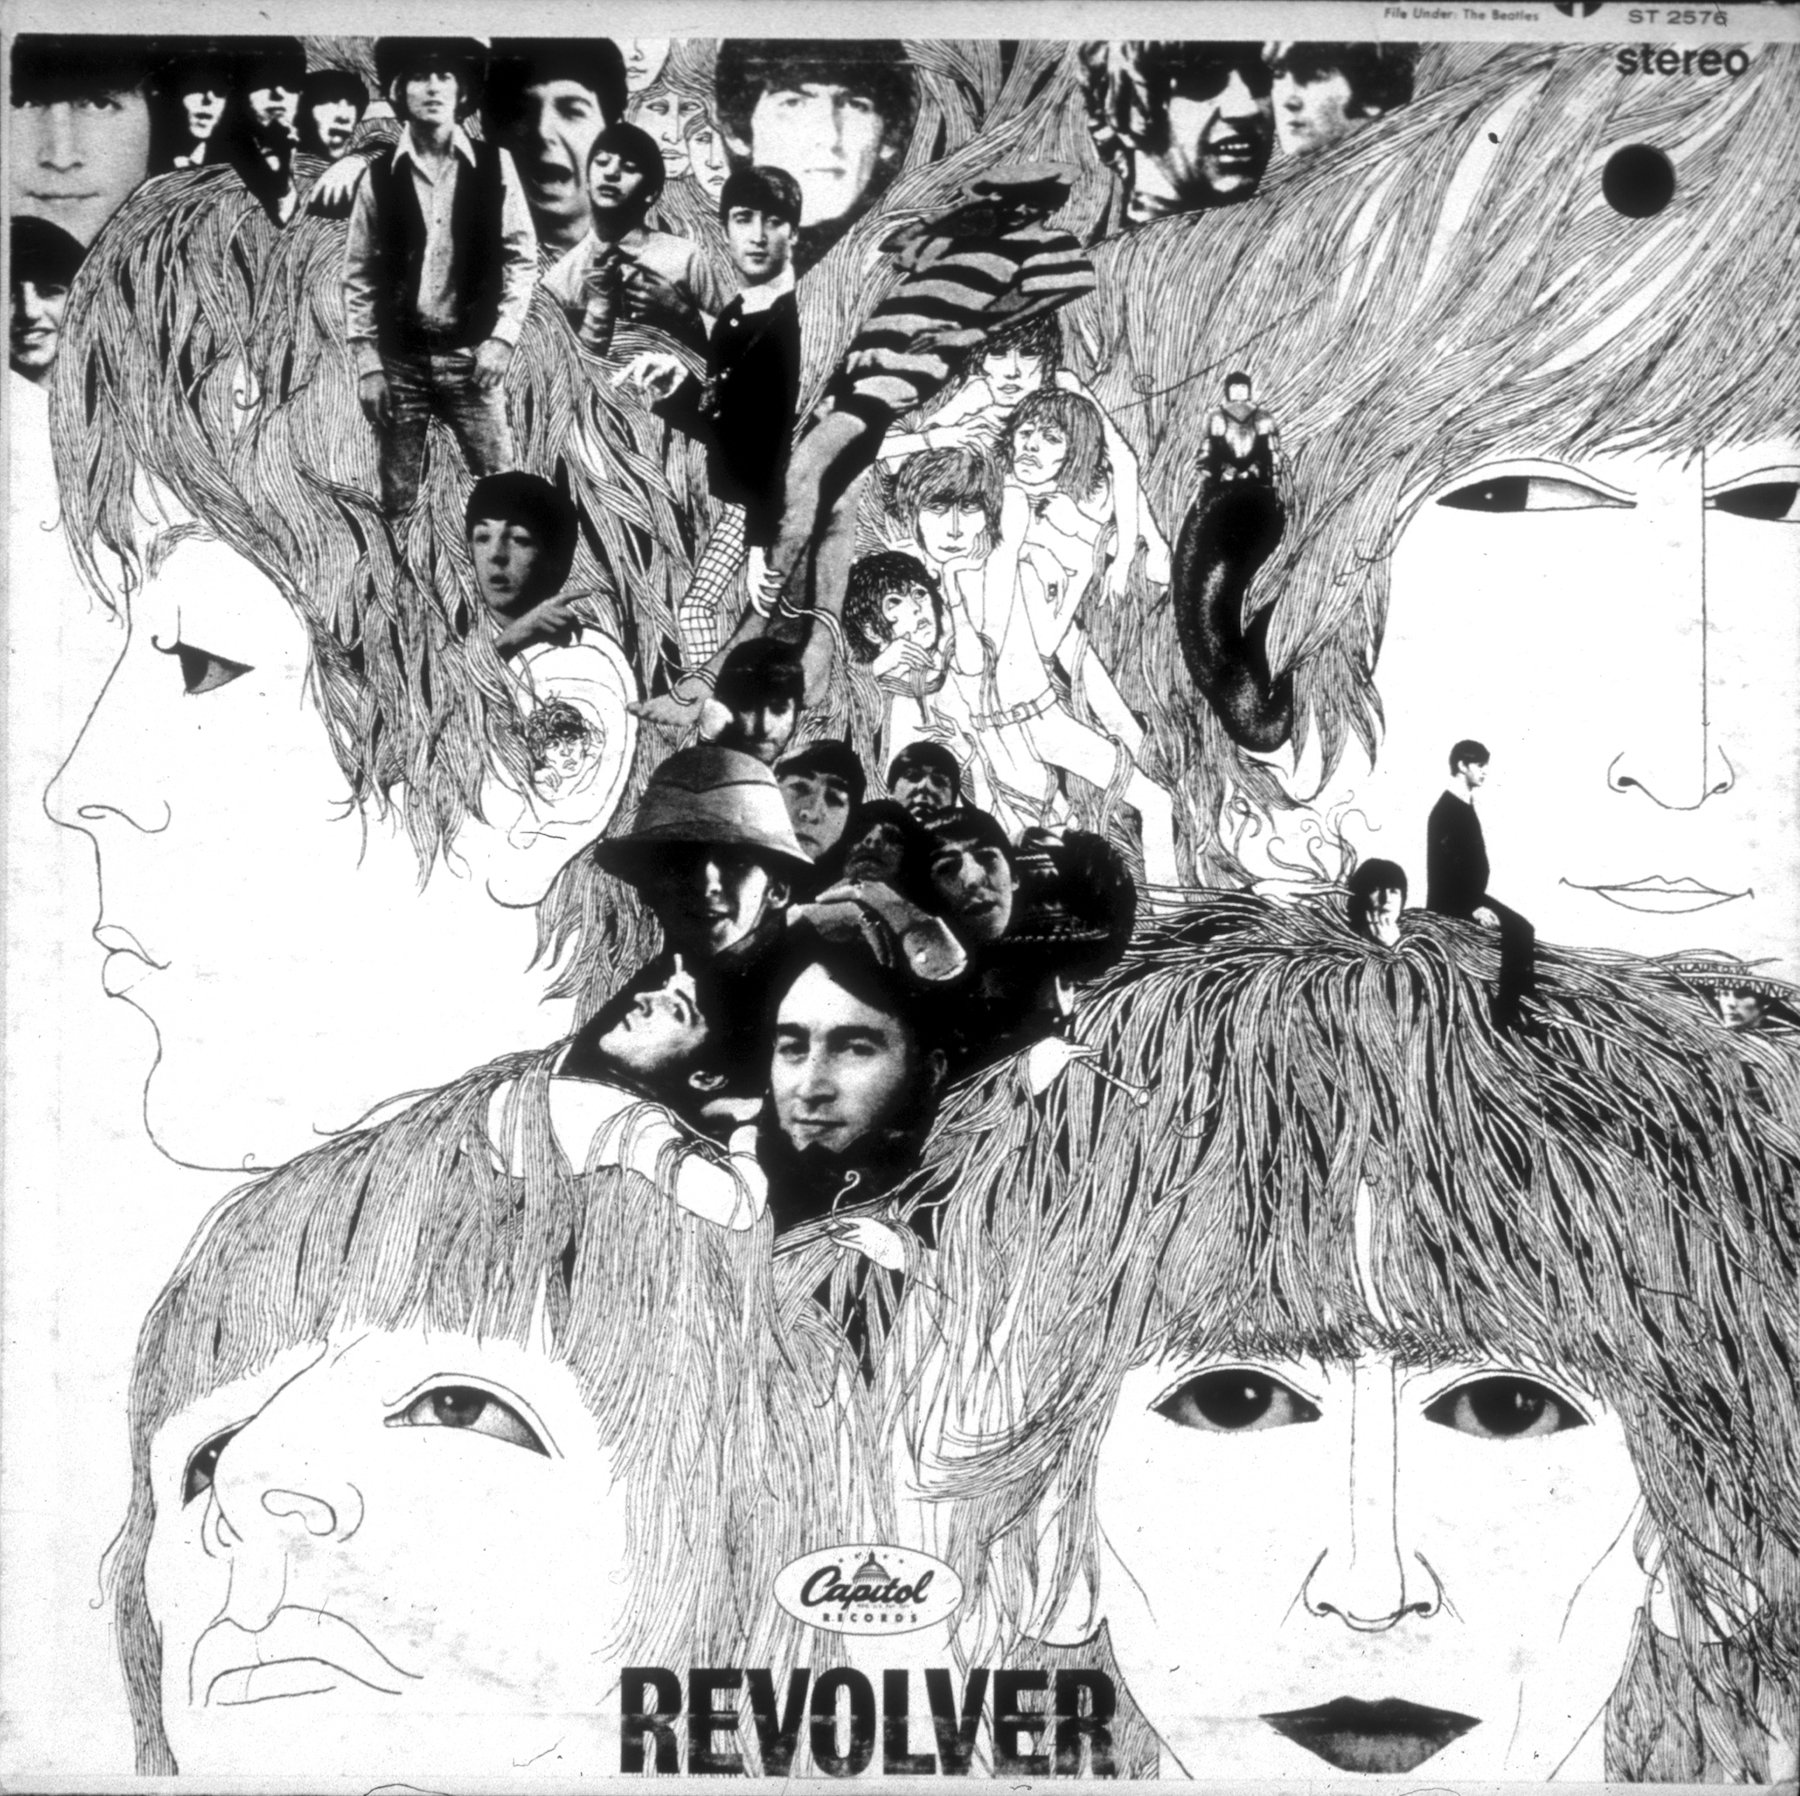 Album cover designed by artist Klaus Voorman for rock and roll band The Beatles album 'Revolver'